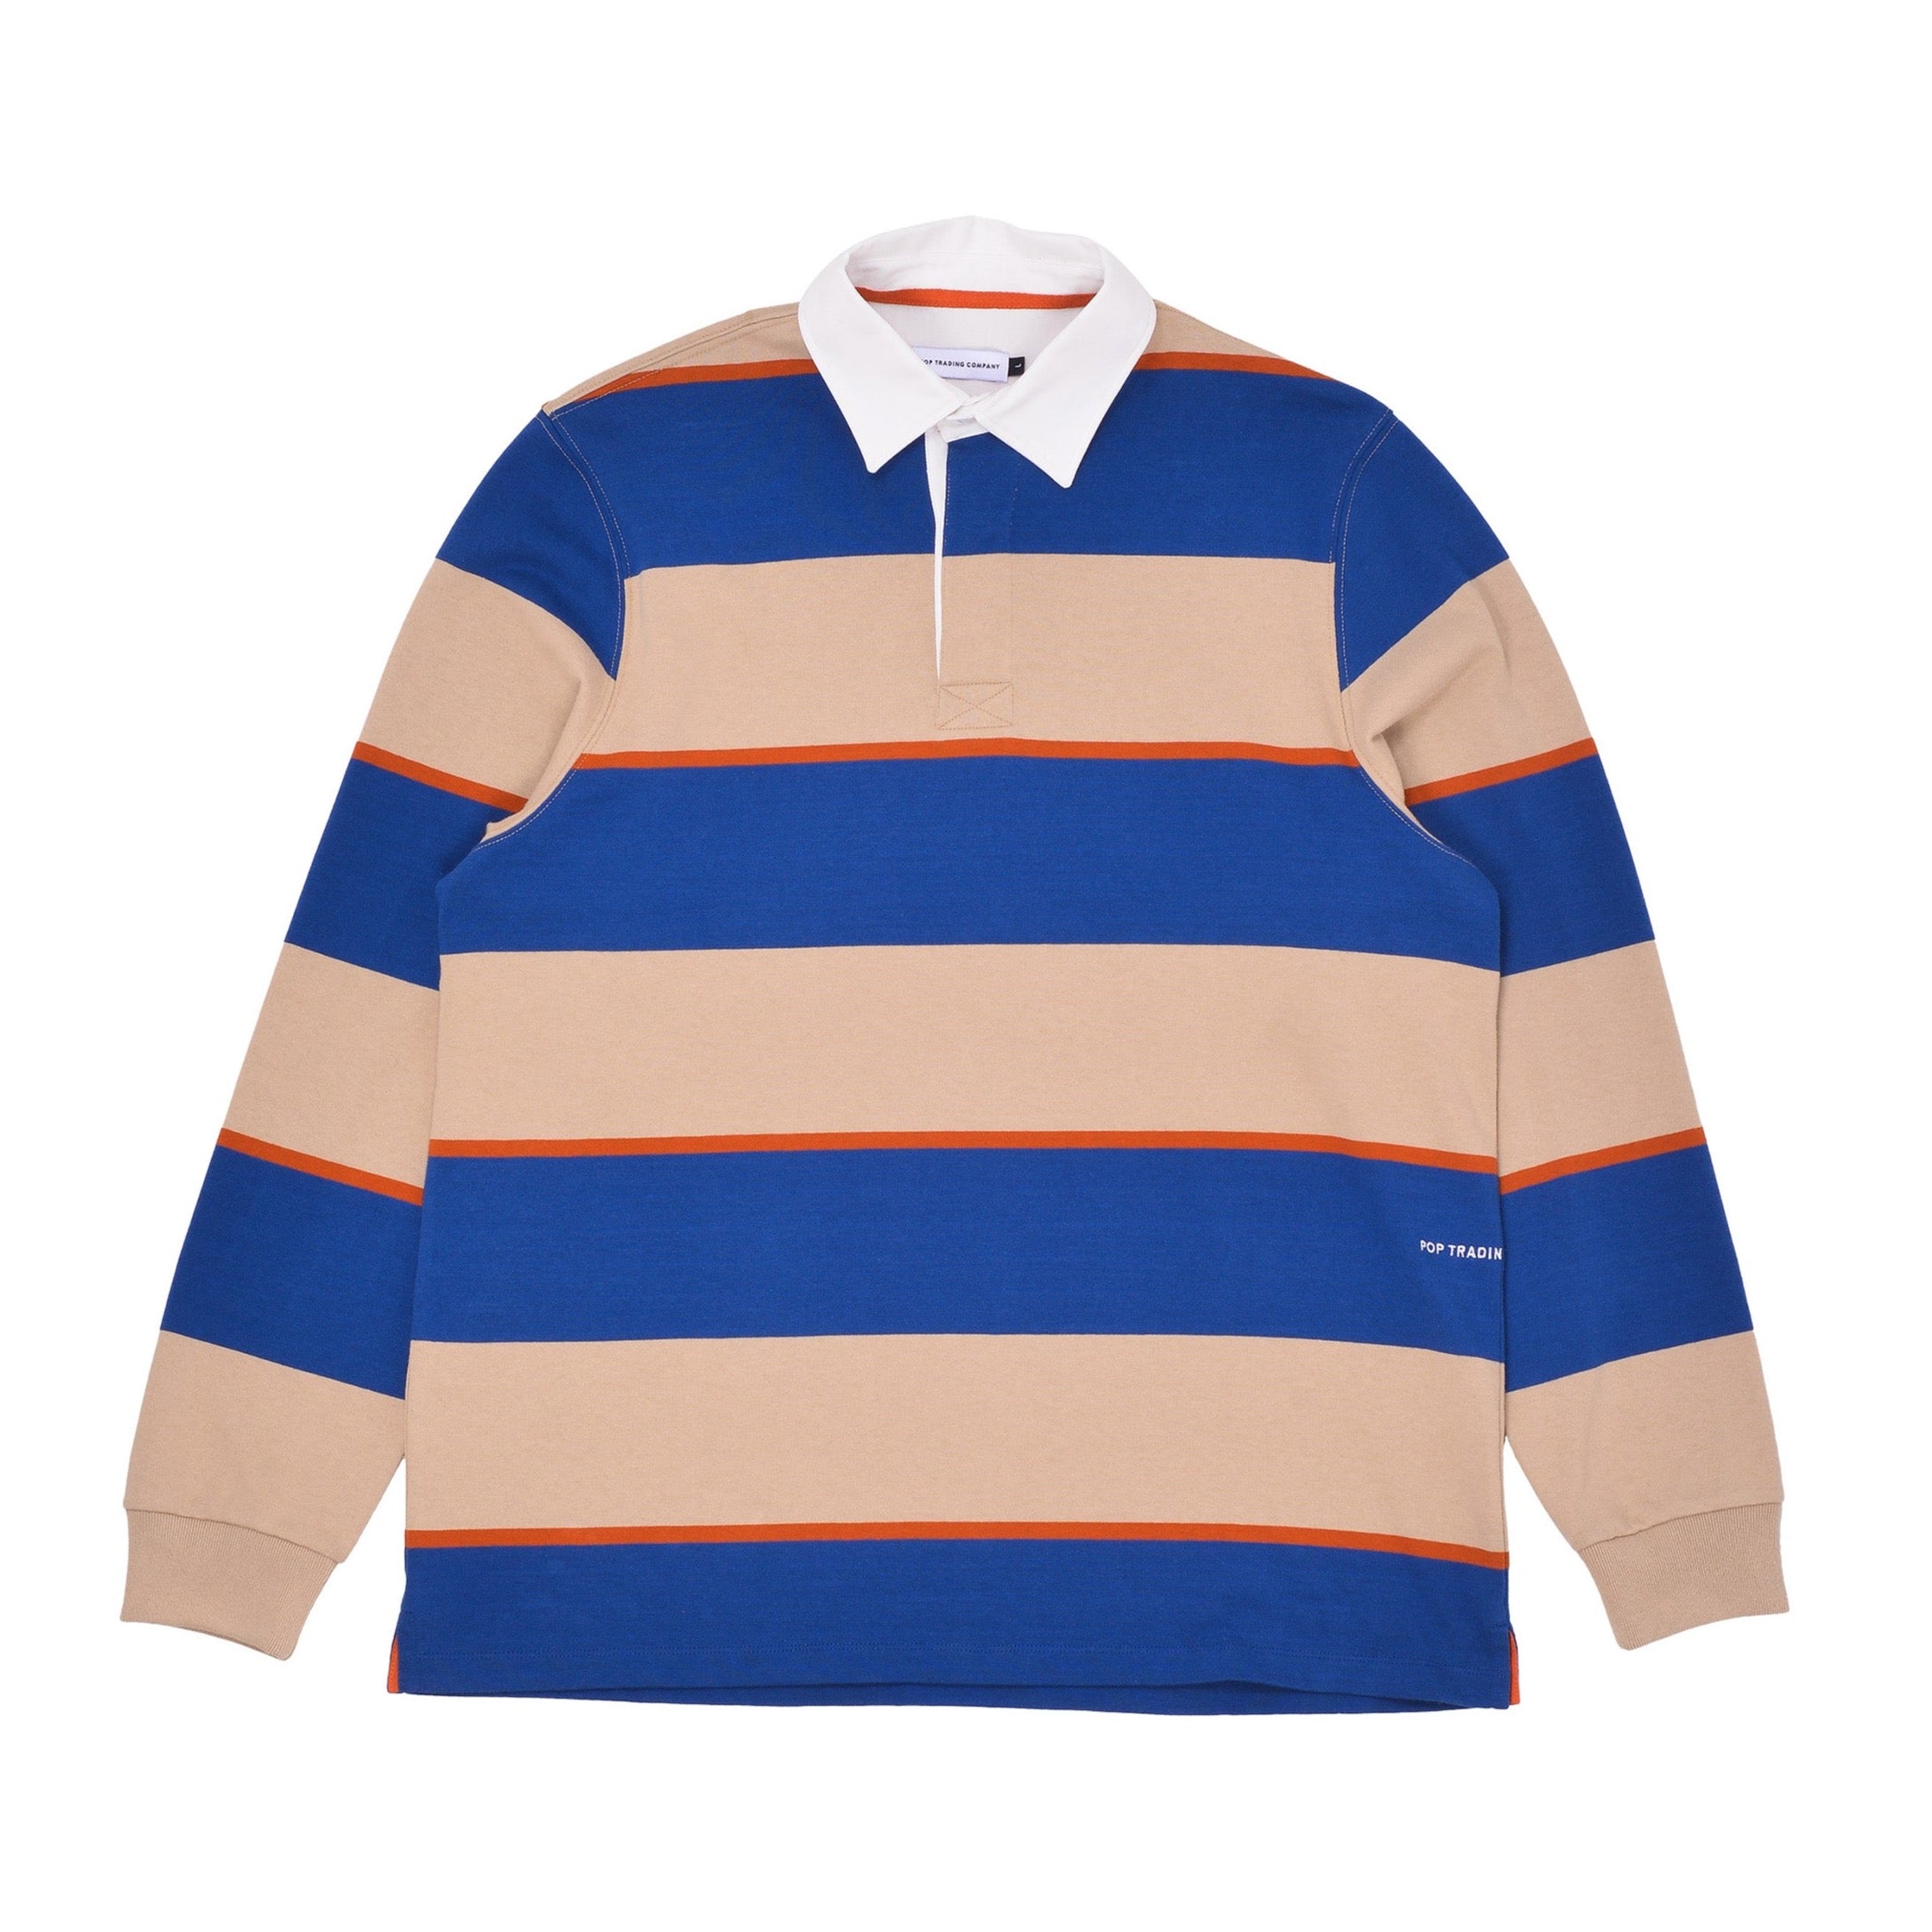 Pop Trading Company - Pop Trading Co - Striped Rugby Shirt - White Pepper